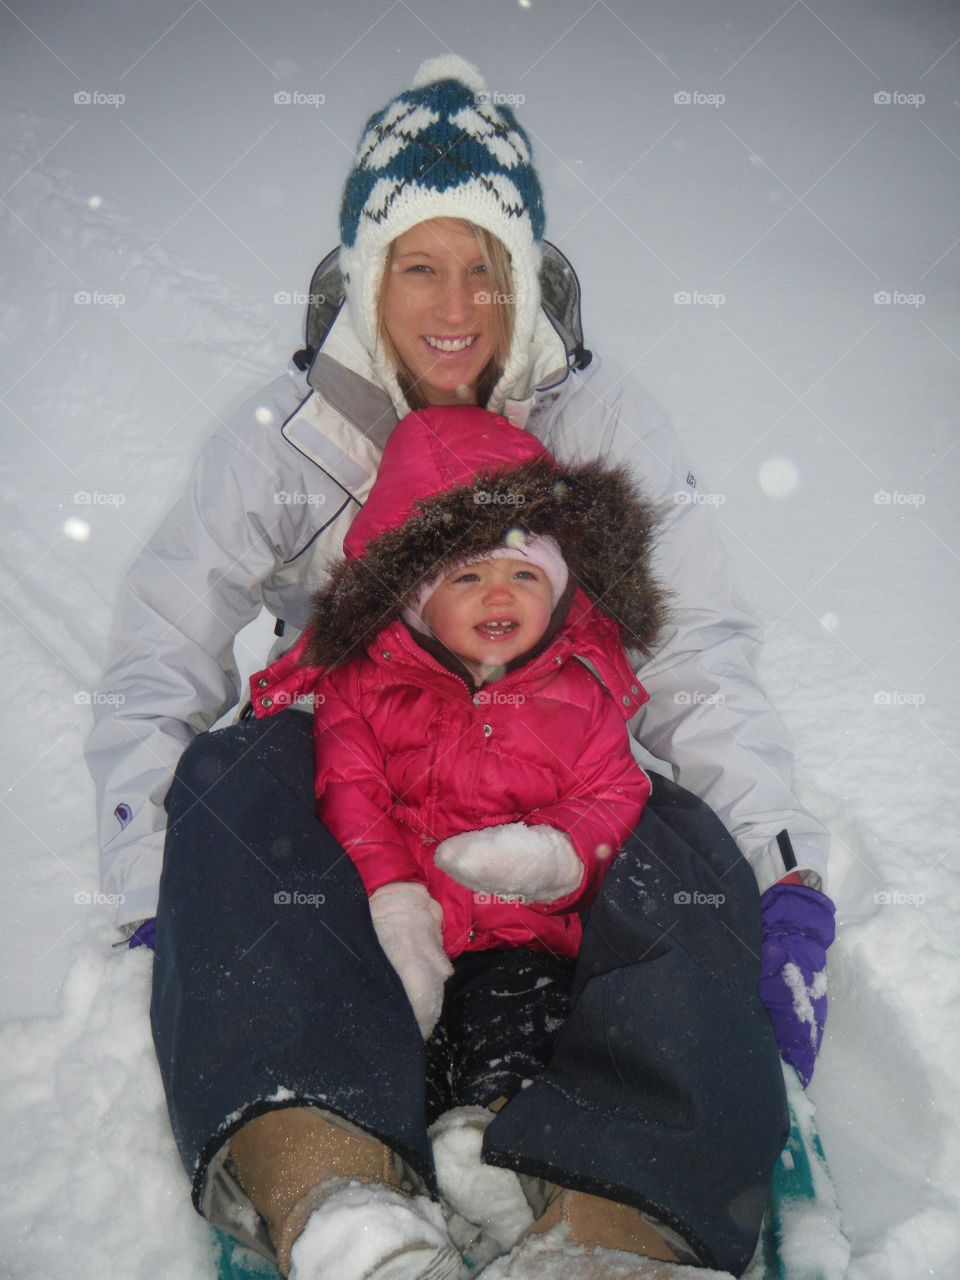 Mama And Her Baby Sledding In The Snowfall 